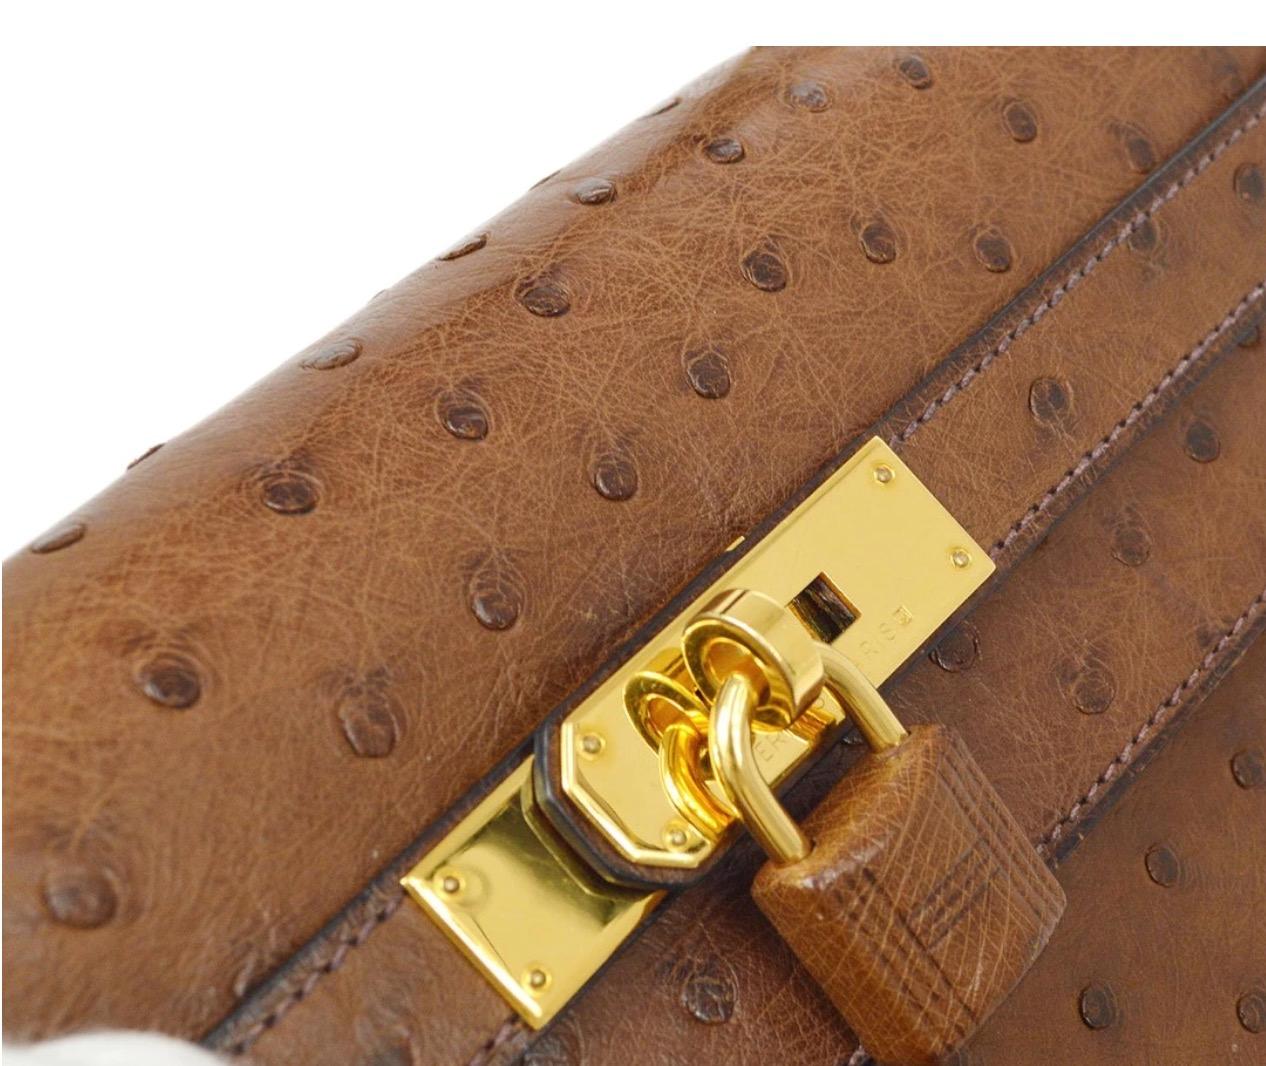 Ostrich
Leather trim
Gold plated hardware 
Leather lining
Turn-lock closure 
Made in France
Handle drop 3.5